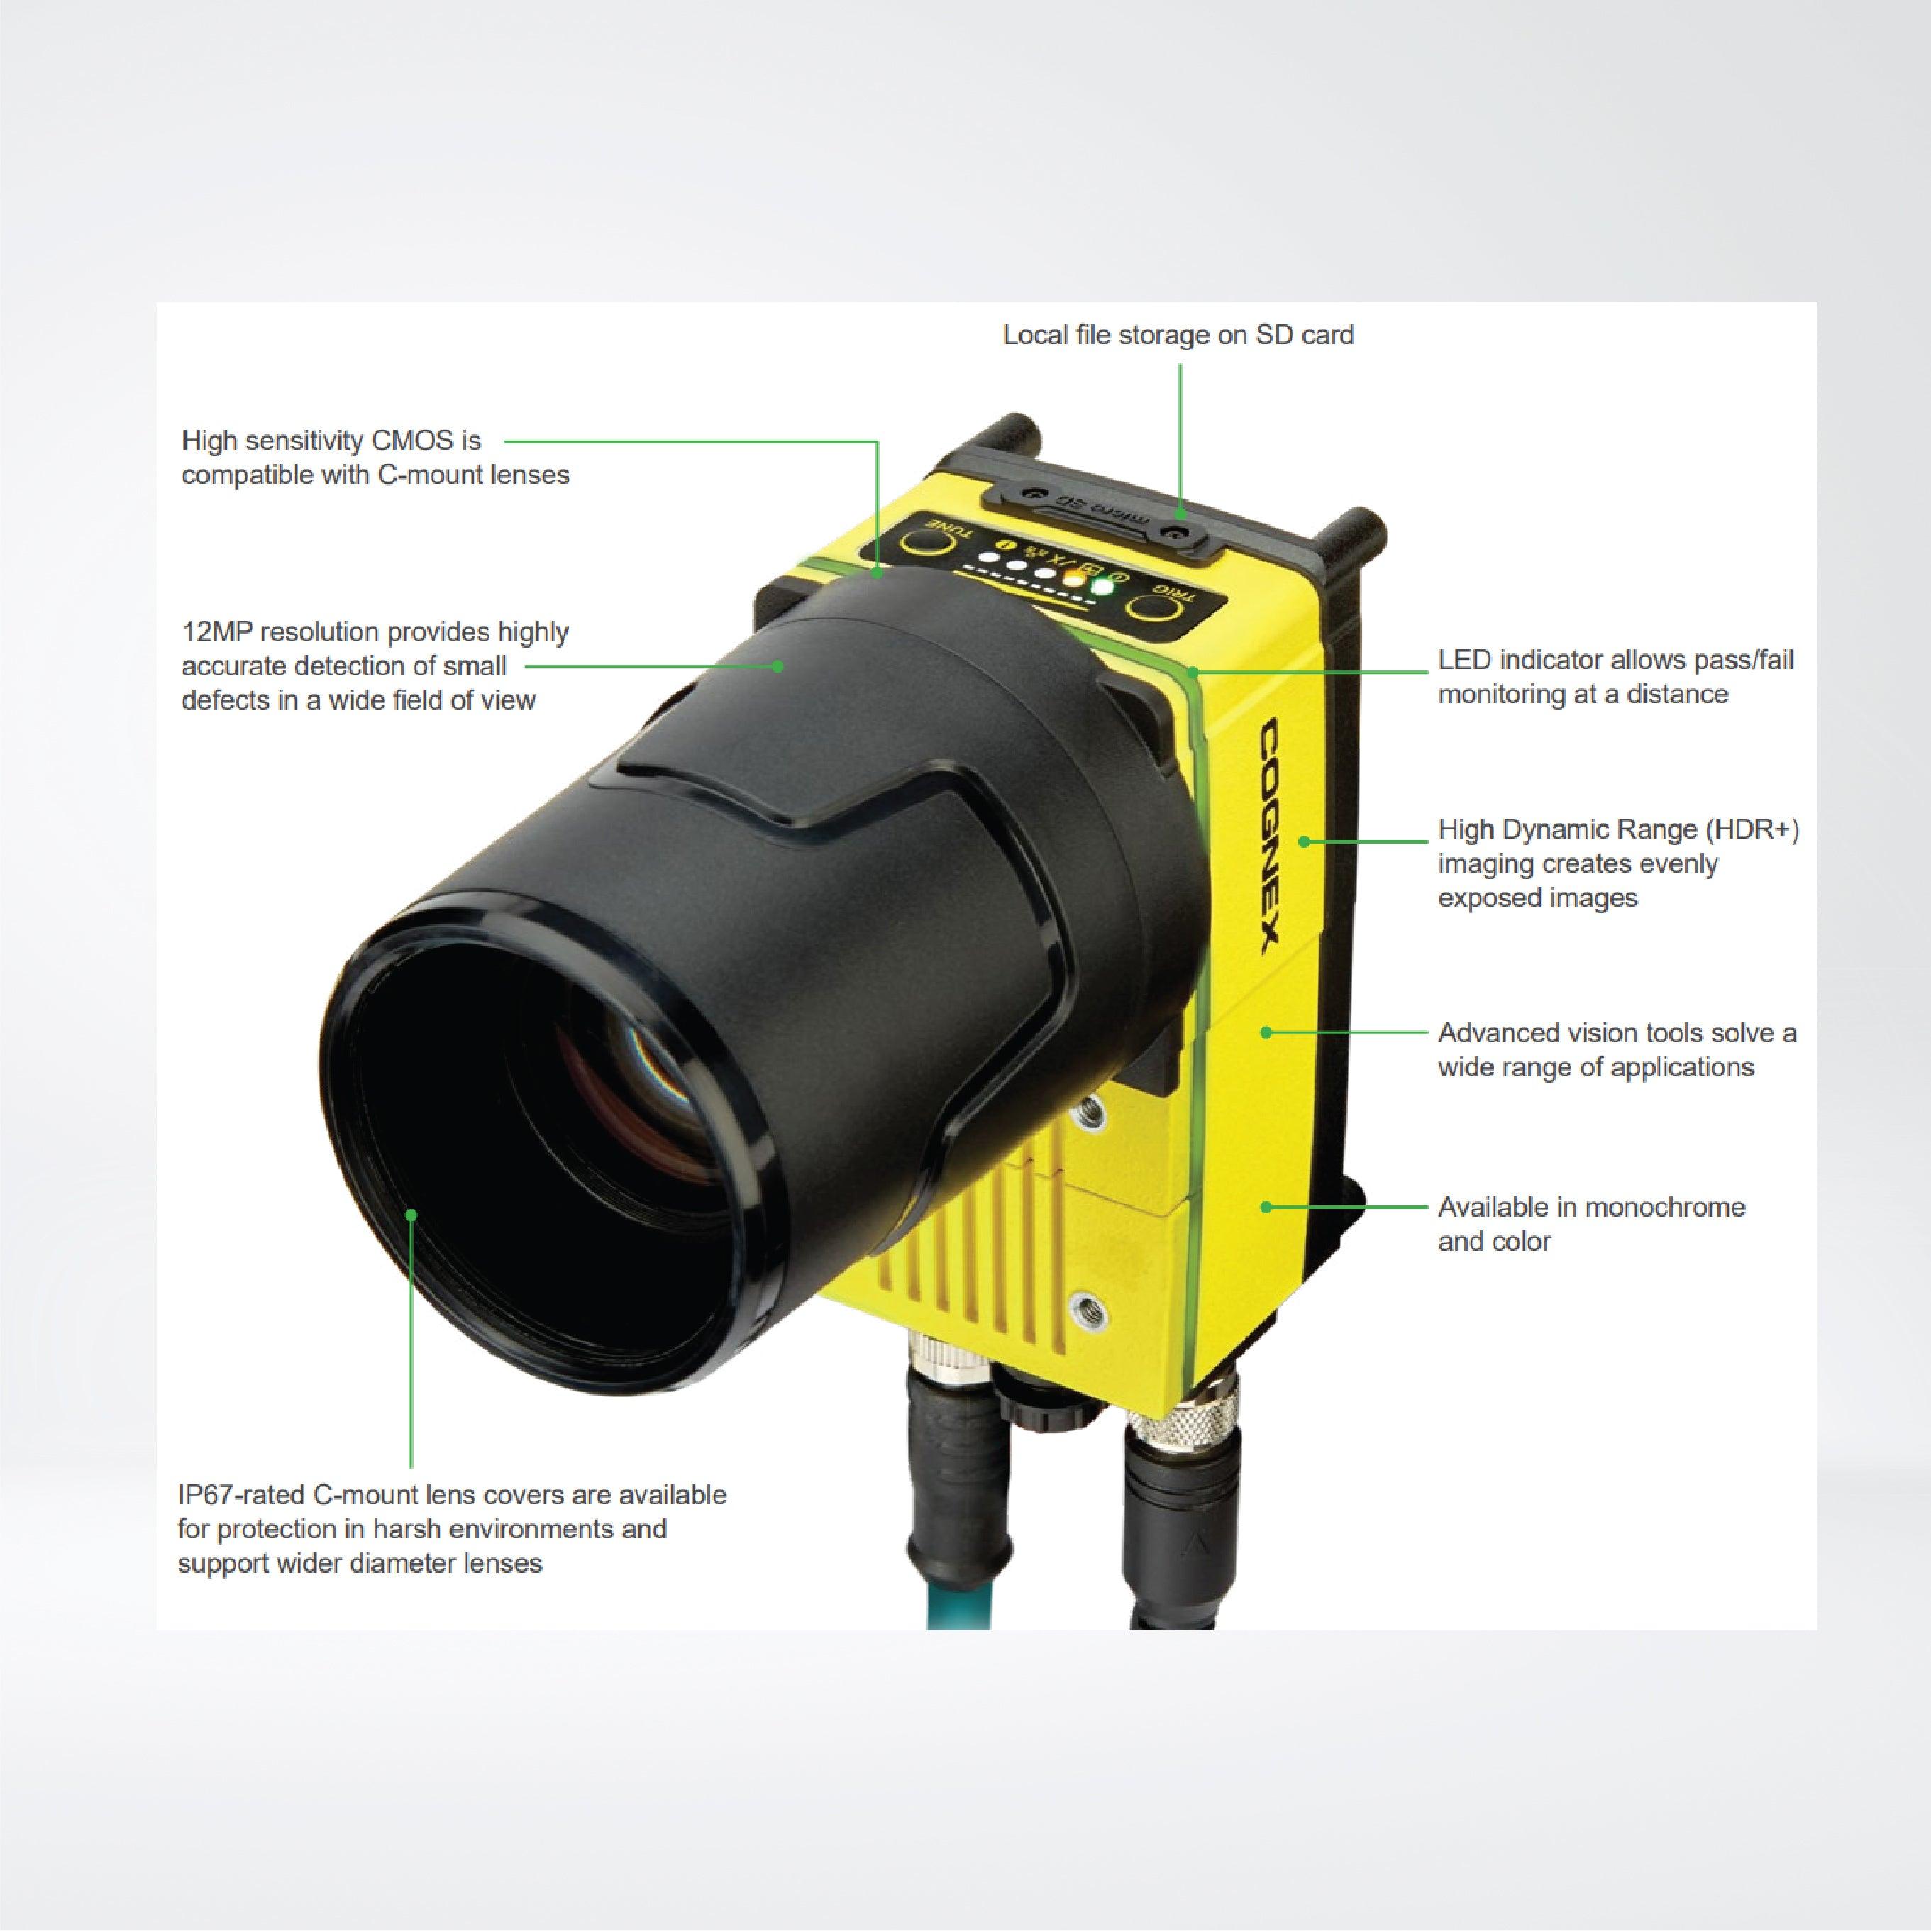 In-Sight 9000 vision system , Ultra-high resolution, self-contained vision systems for detailed inspections - Riverplus